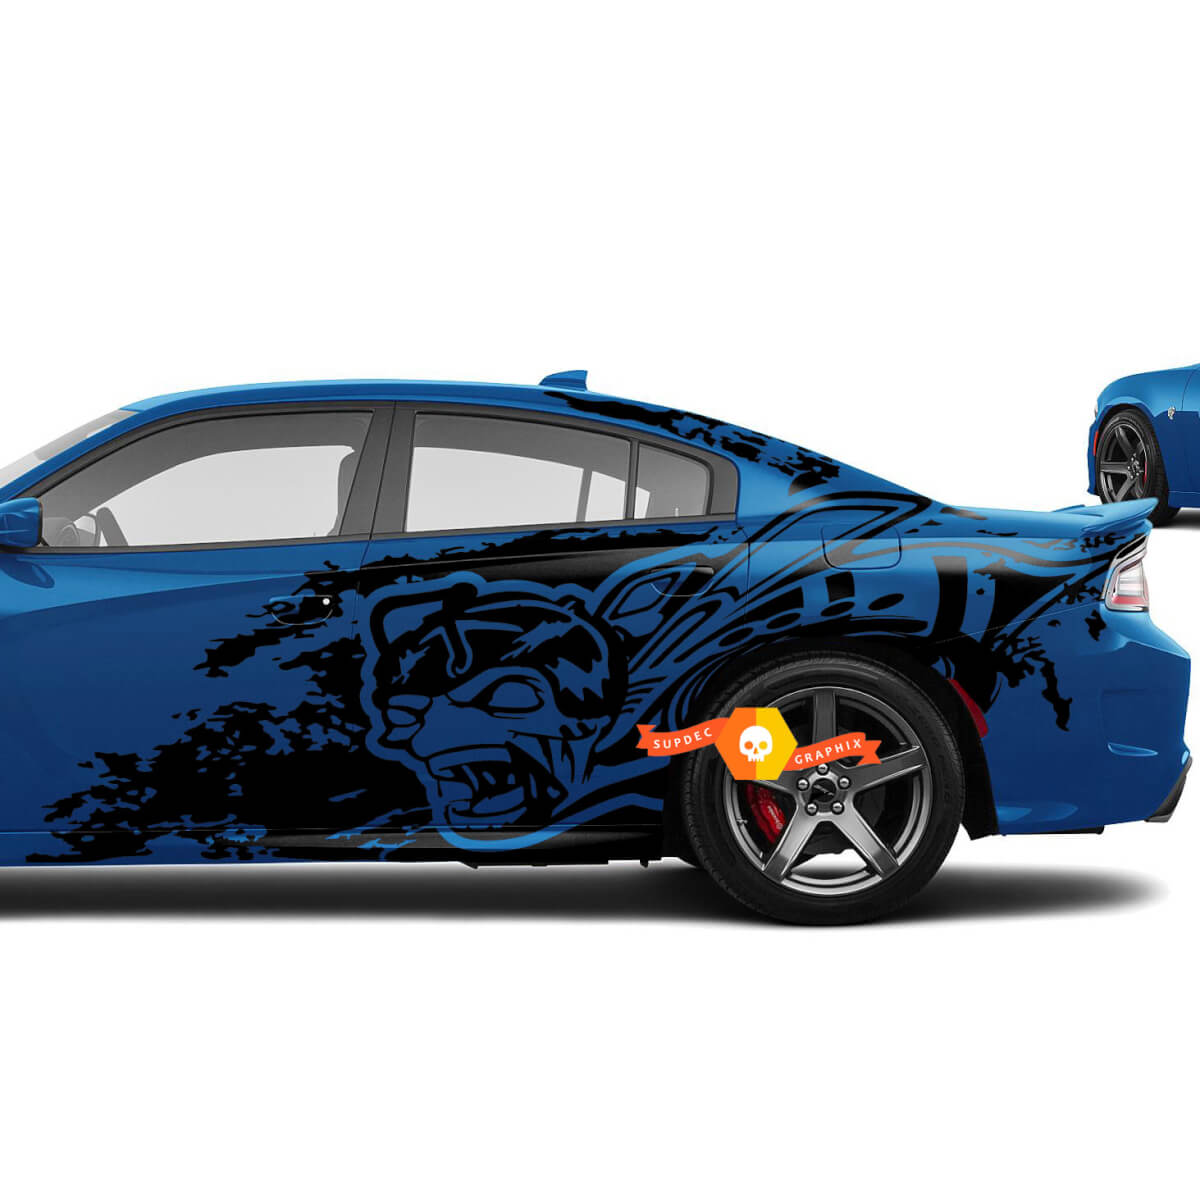 Dodge Challenger Charger Zombie Head Super Bee style Splash Grunge Stripes Kit Hell Cat Vinyl Decal Graphic